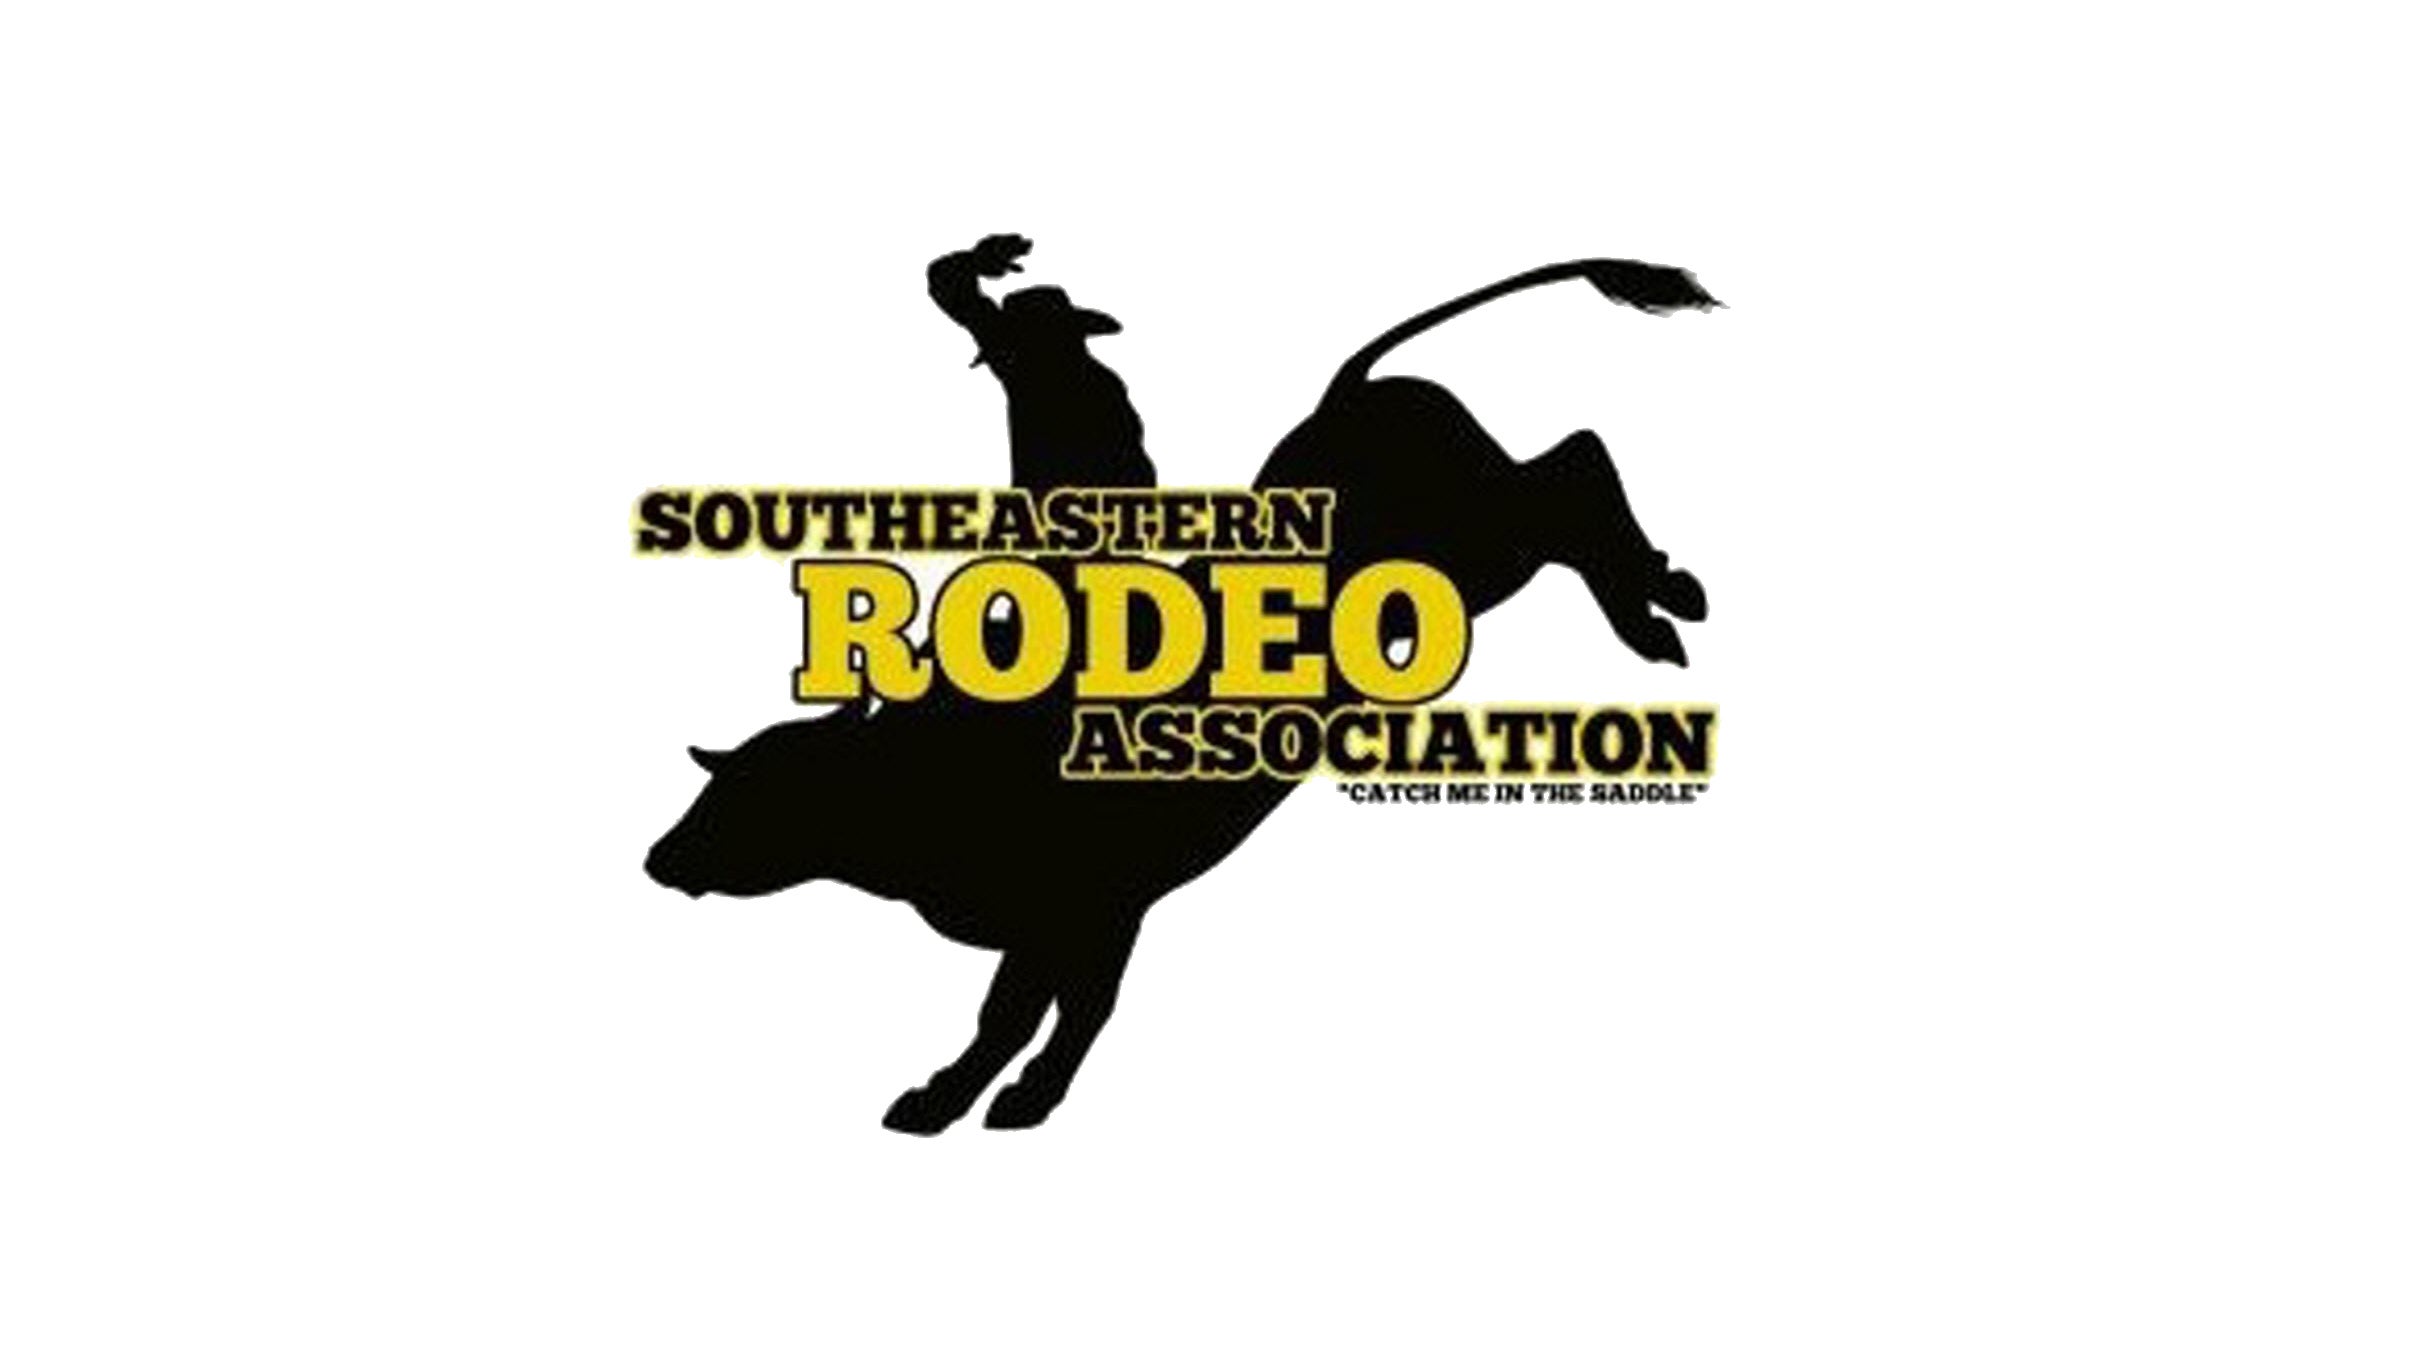 Southeastern Rodeo Association at Lake Charles Event Center